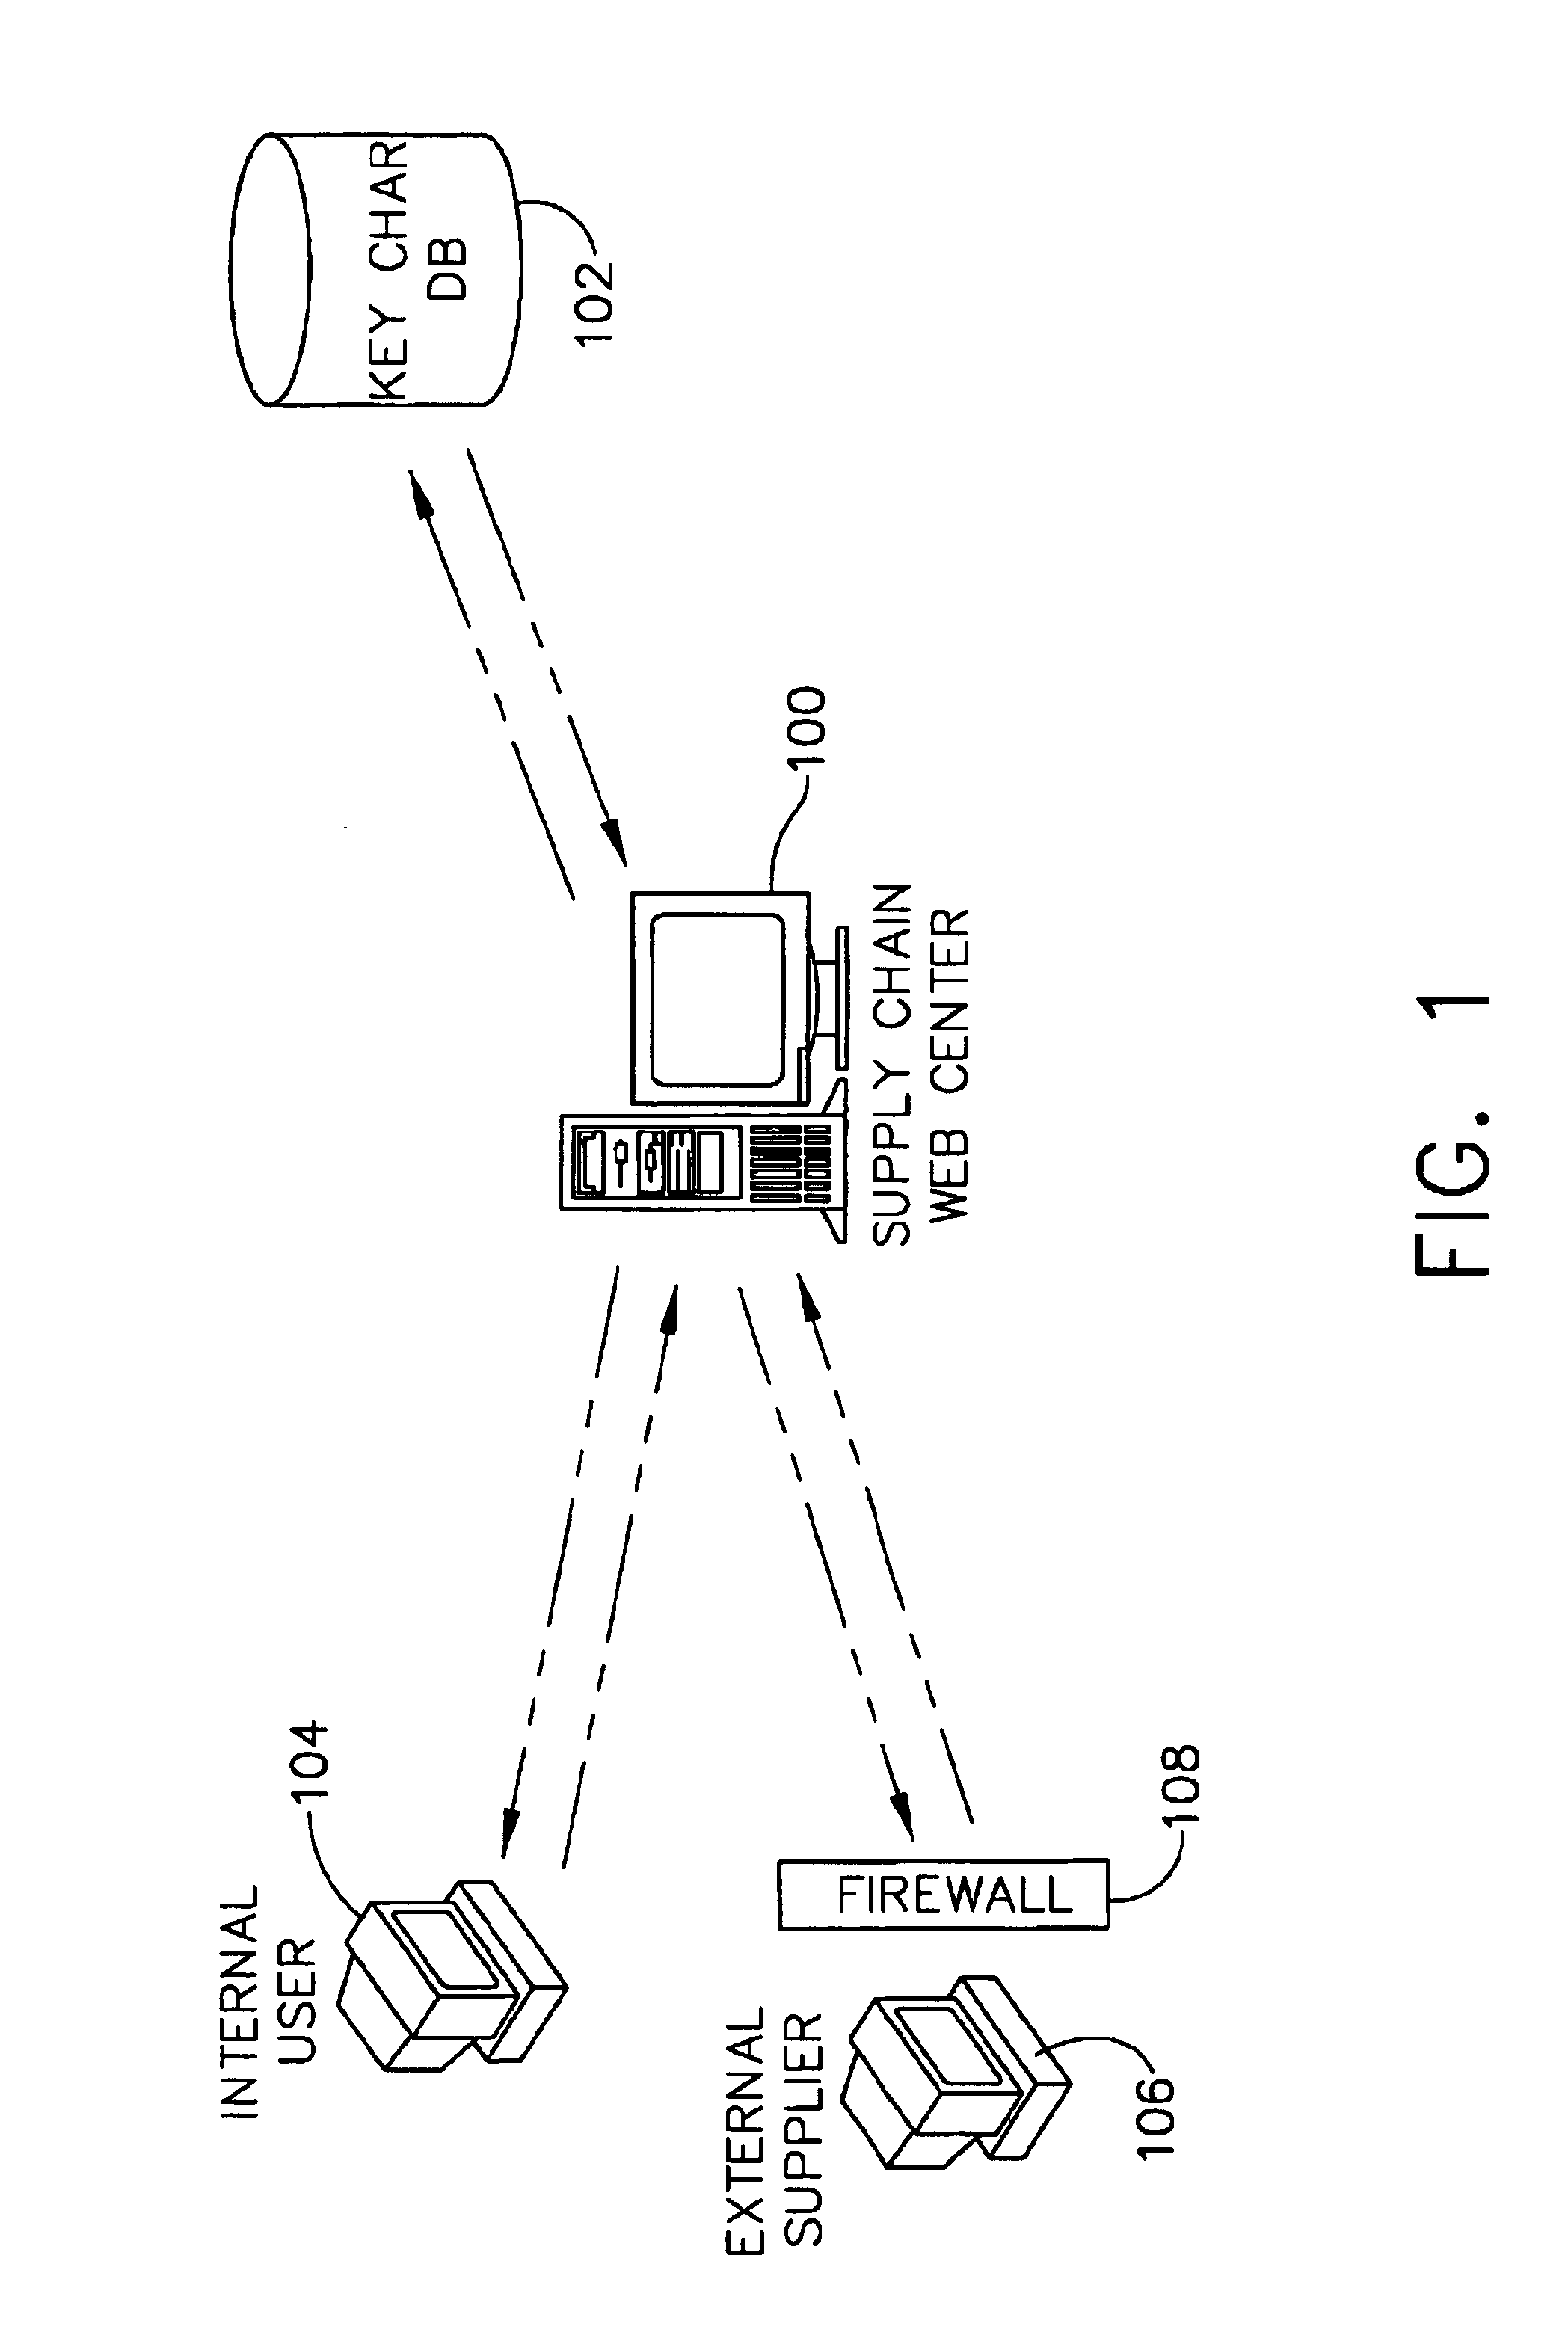 Web based process capability data collection and reporting system